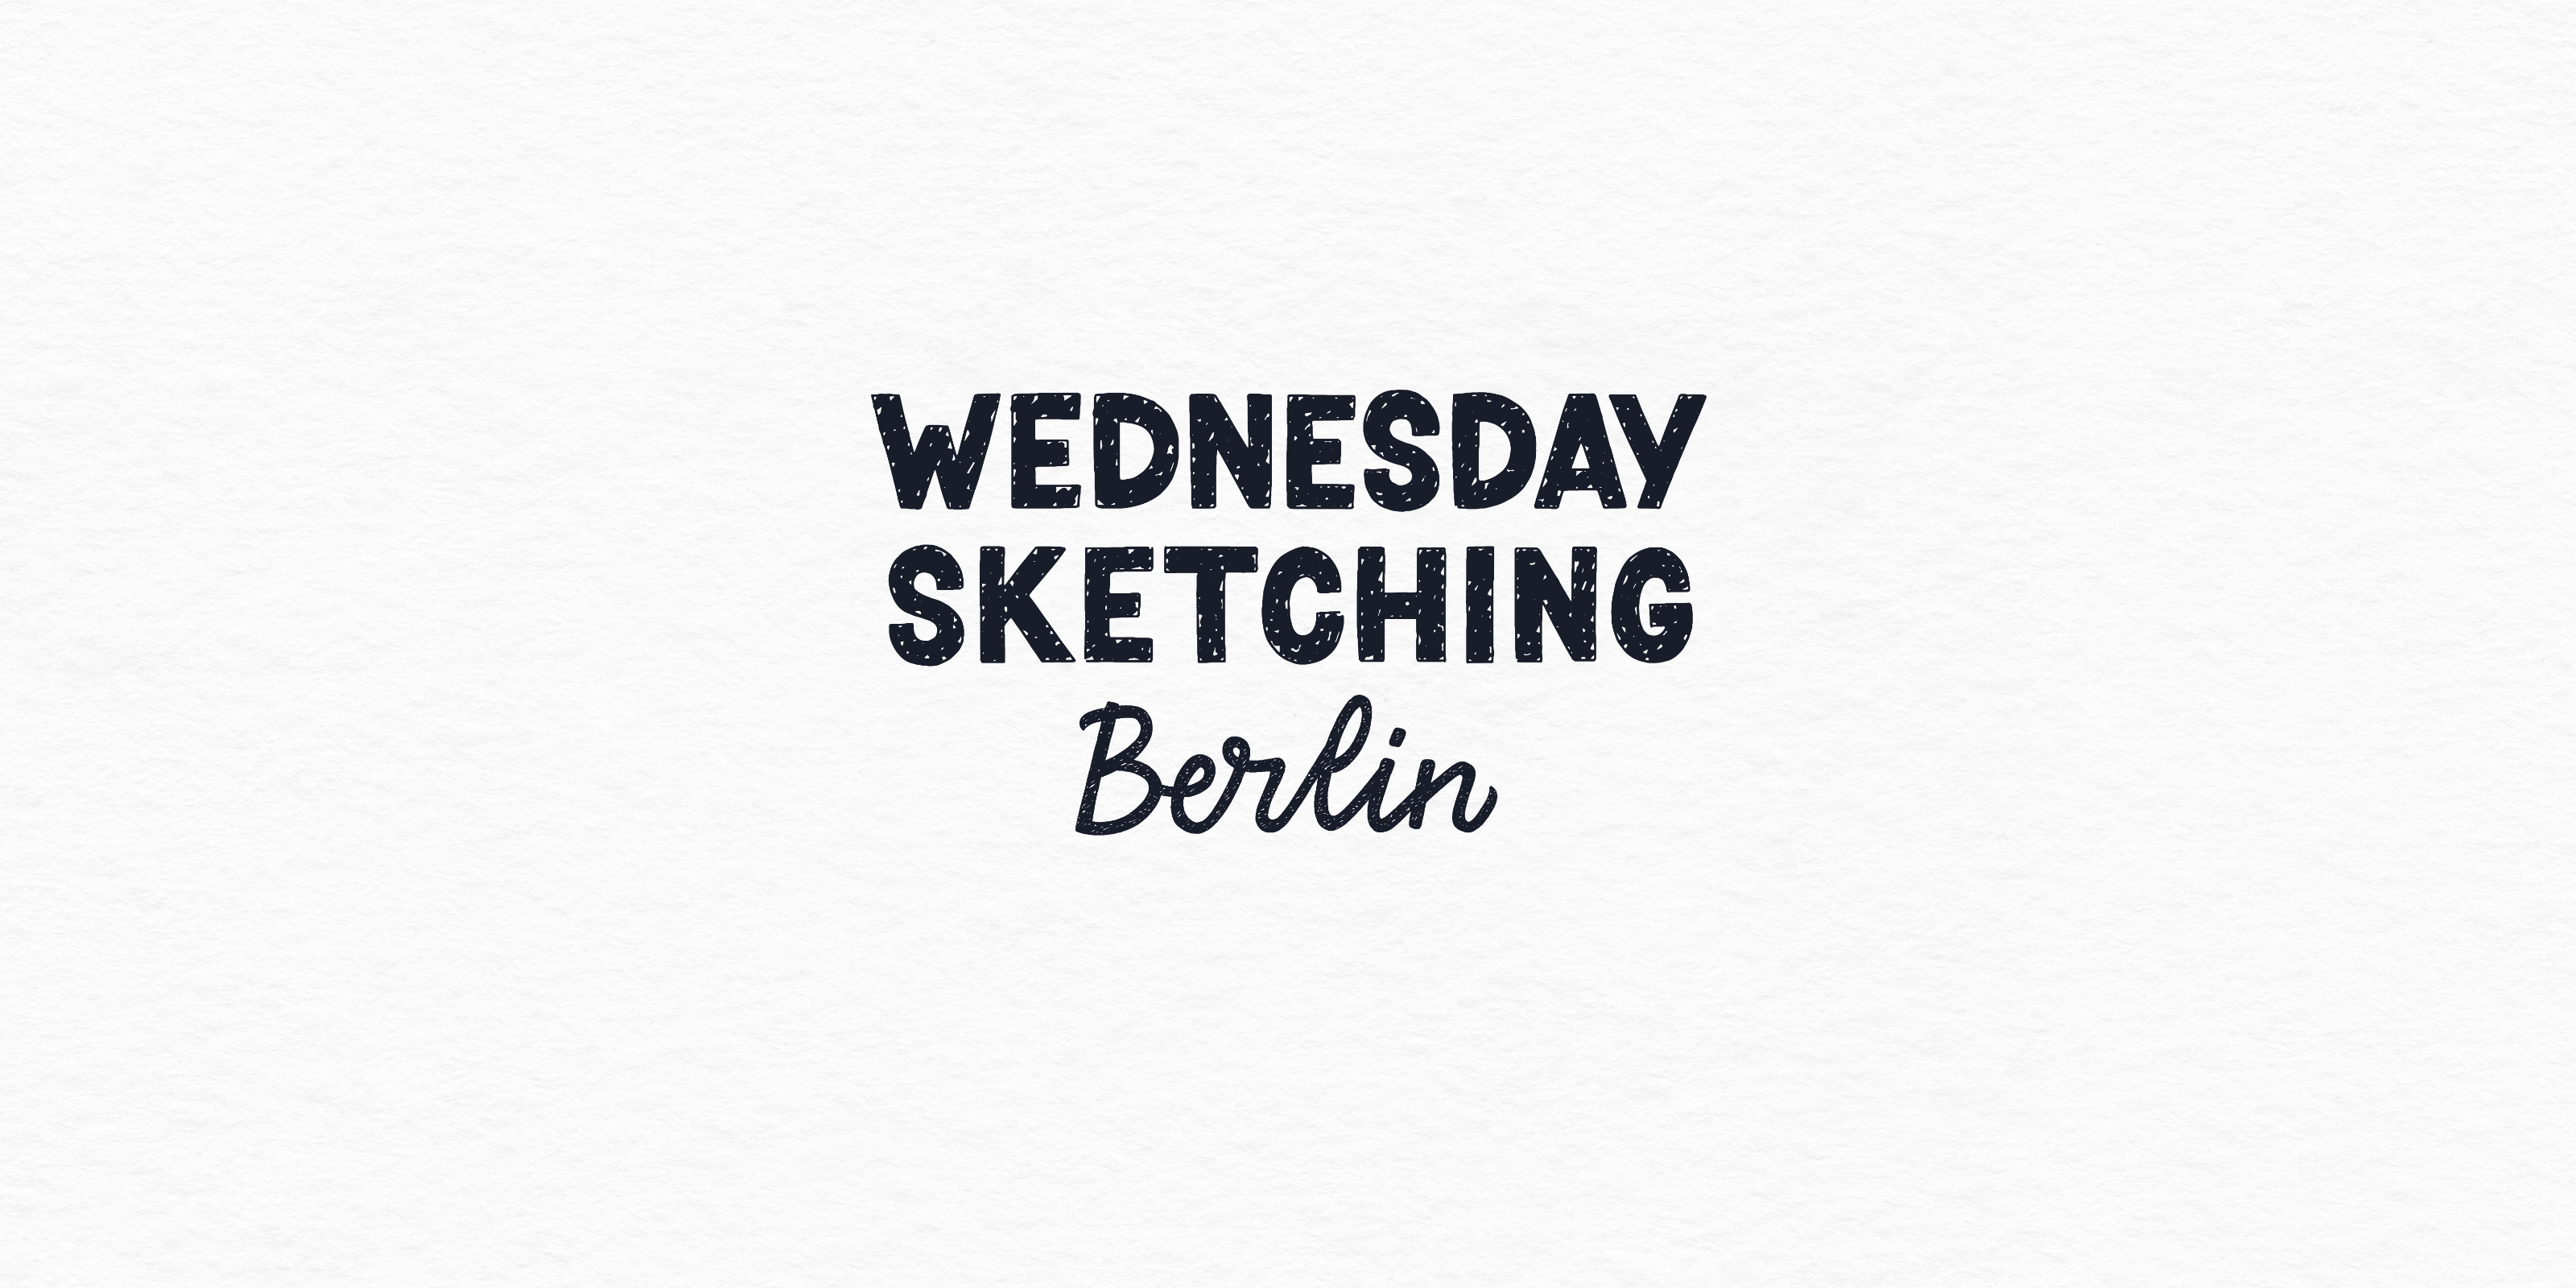 Wednesday sketching berlin - hand-lettered logo